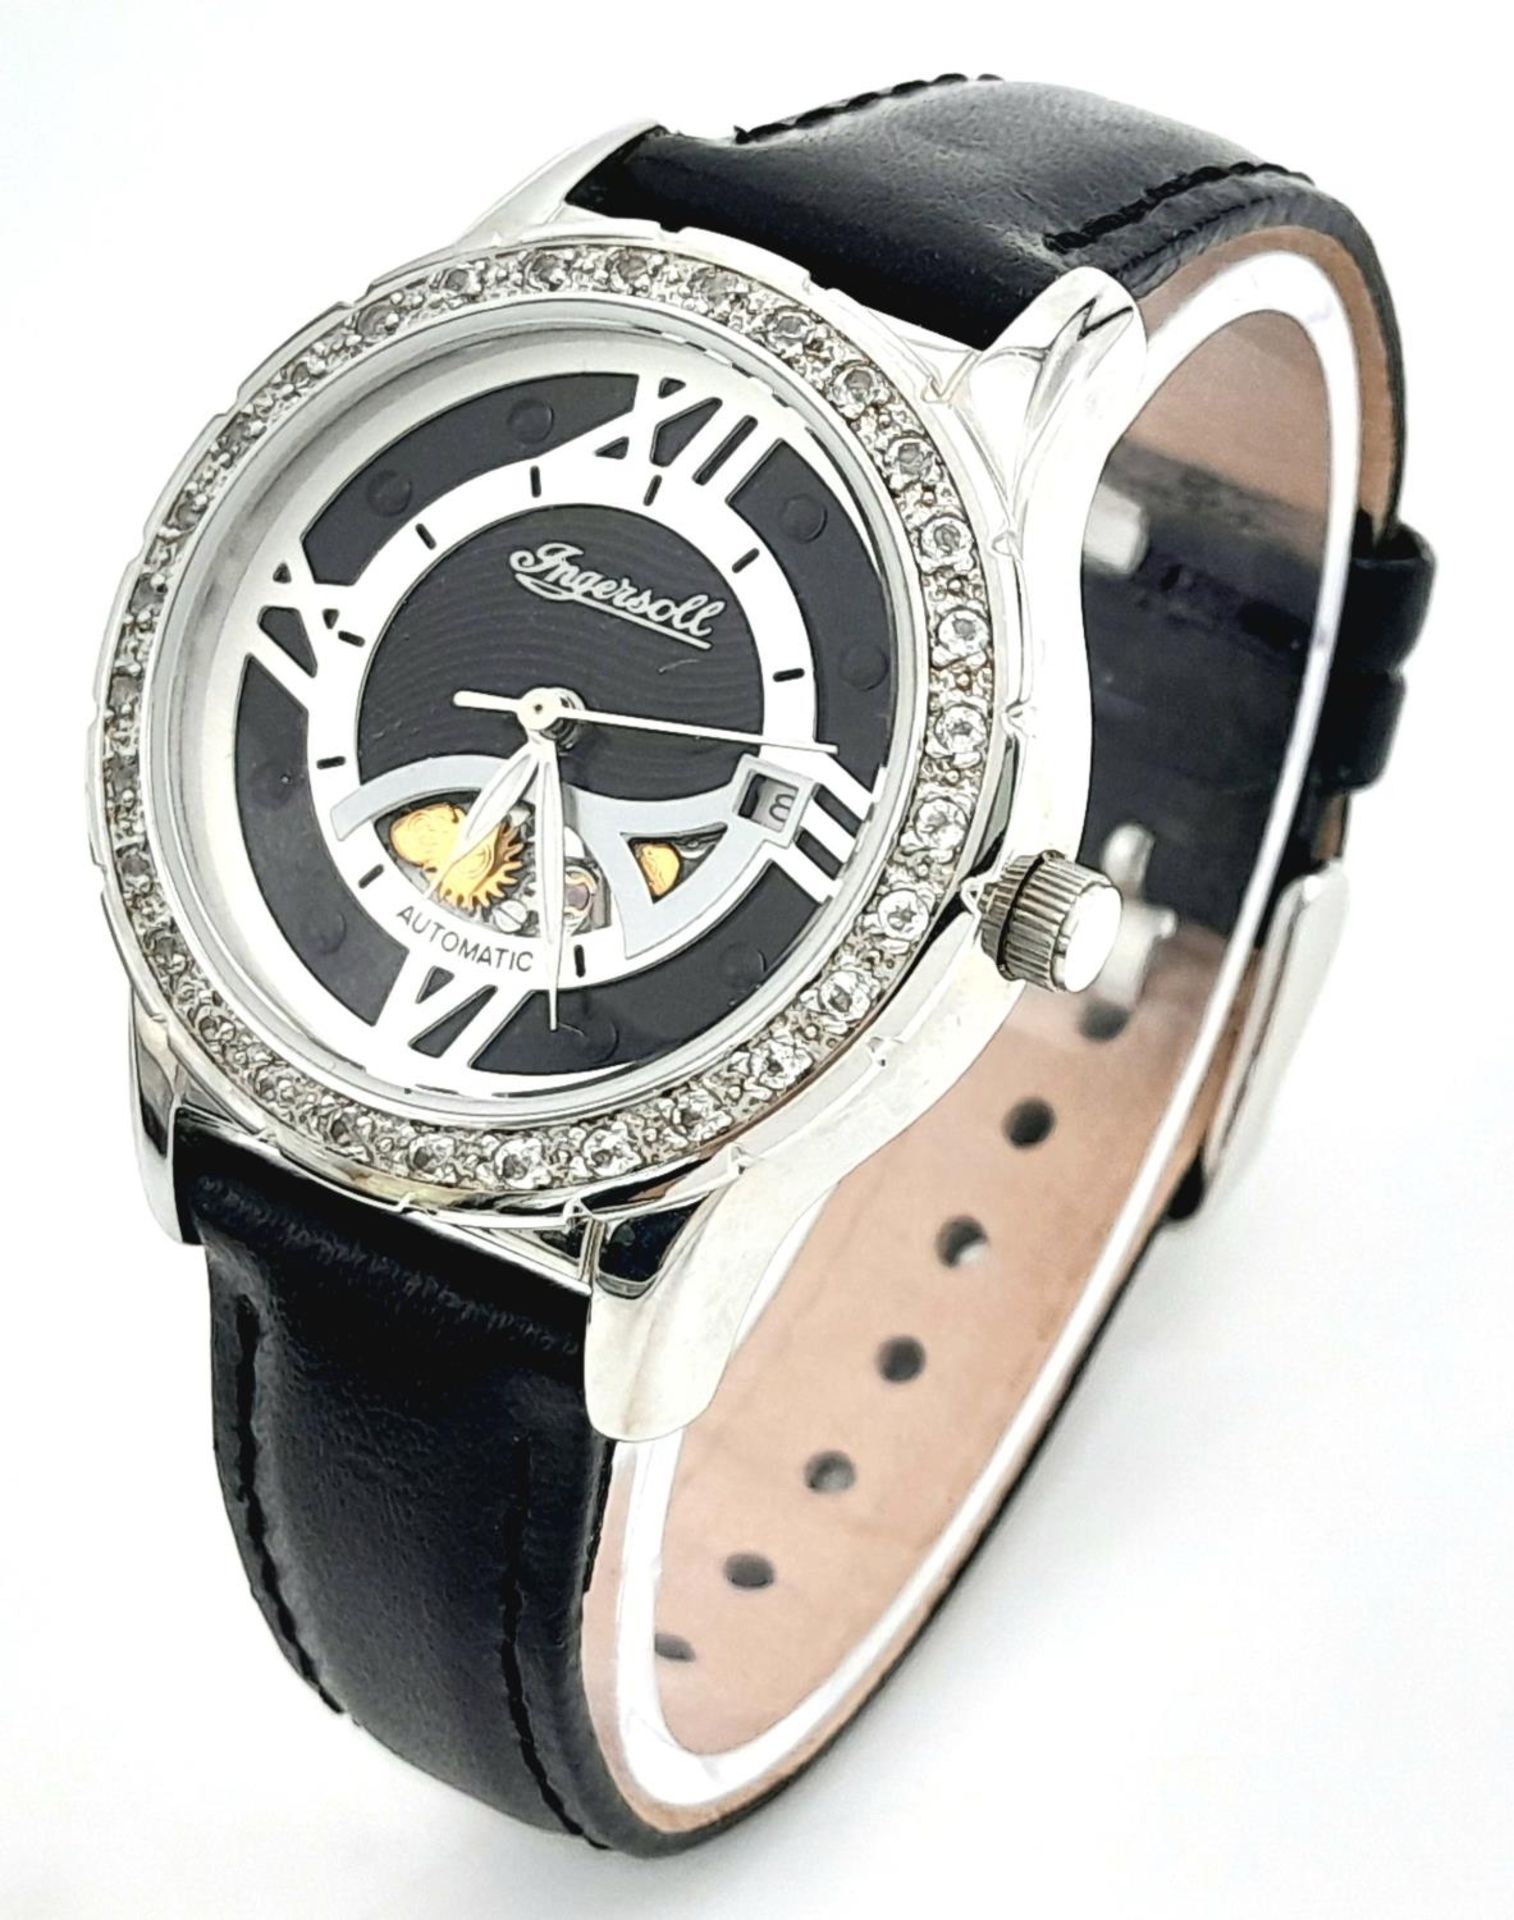 An Ingersoll Automatic Skeleton Ladies Watch. Black leather strap. Stainless steel case - 32mm.